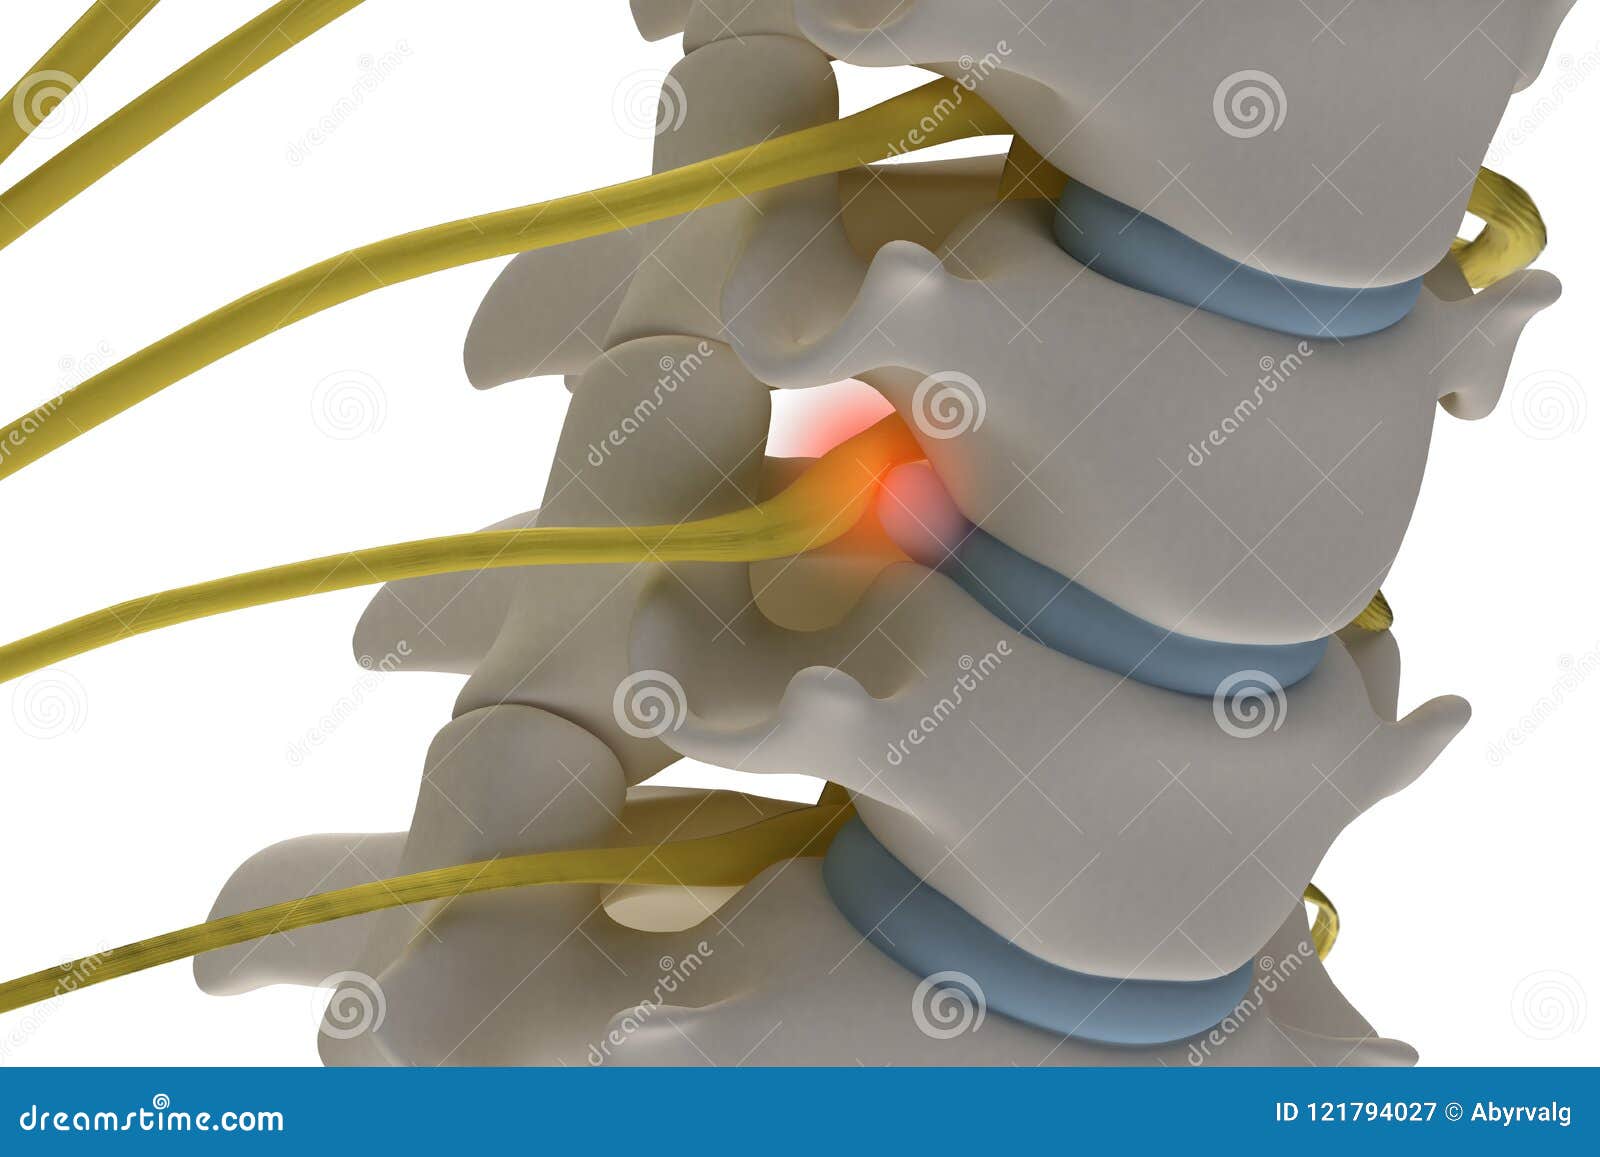 anatomically accurate3d image of cervical spine with prolapse of